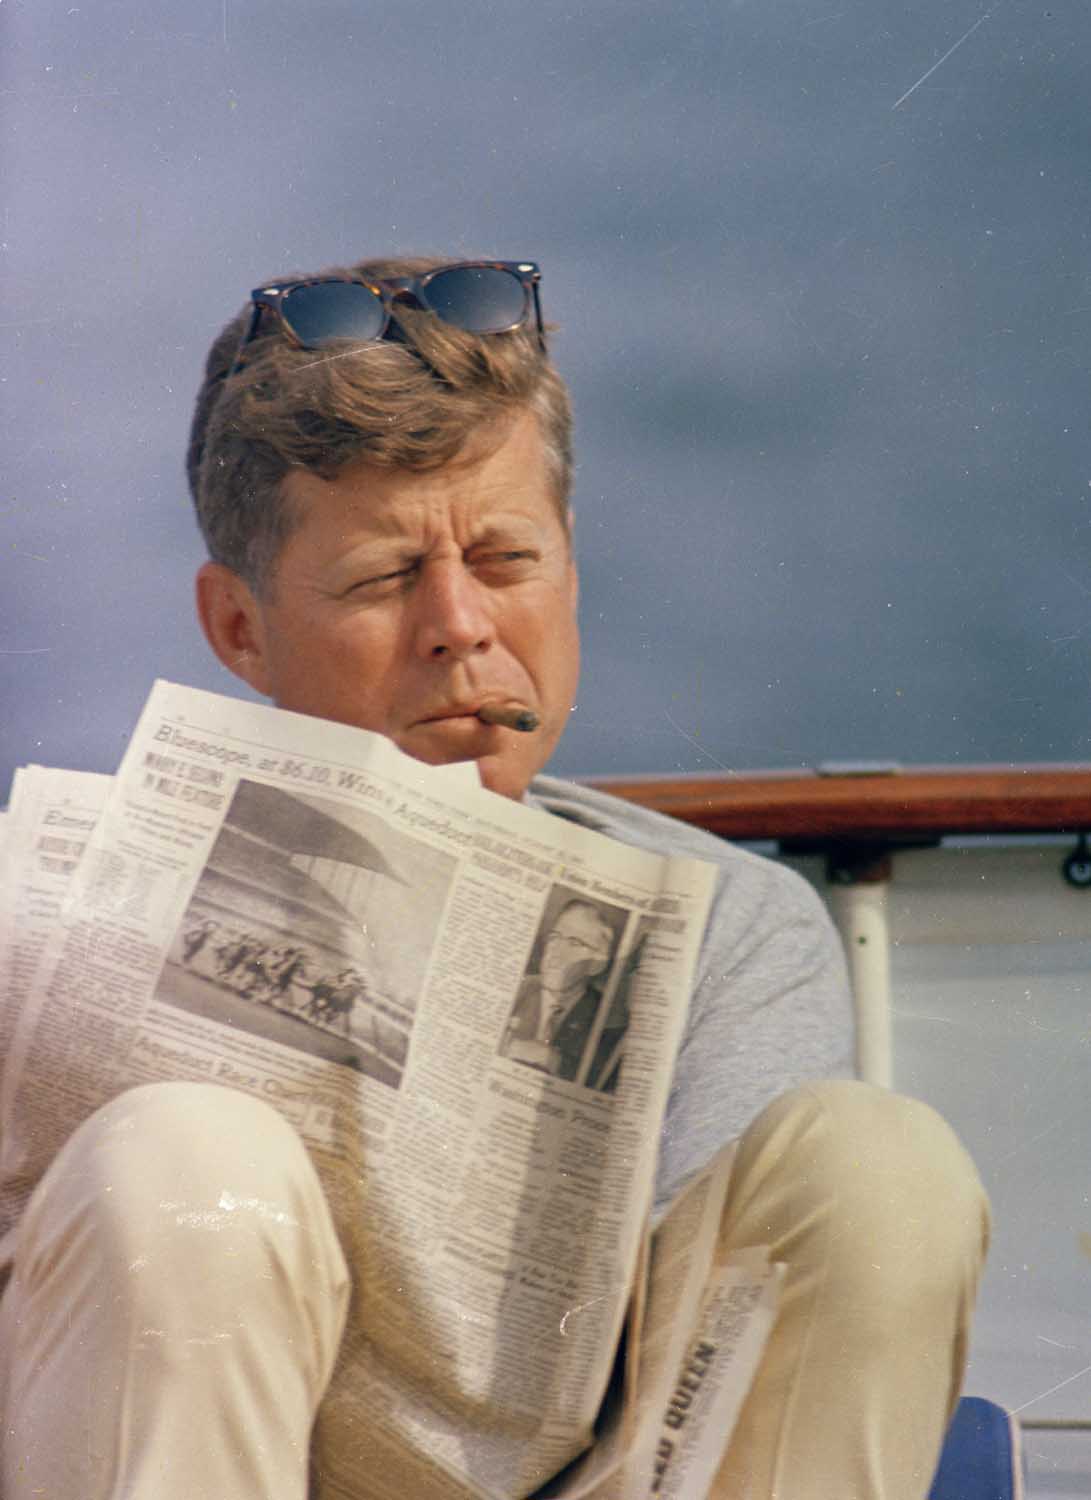 AlphaDogs Sheds New Light on the Life of JFK Below the